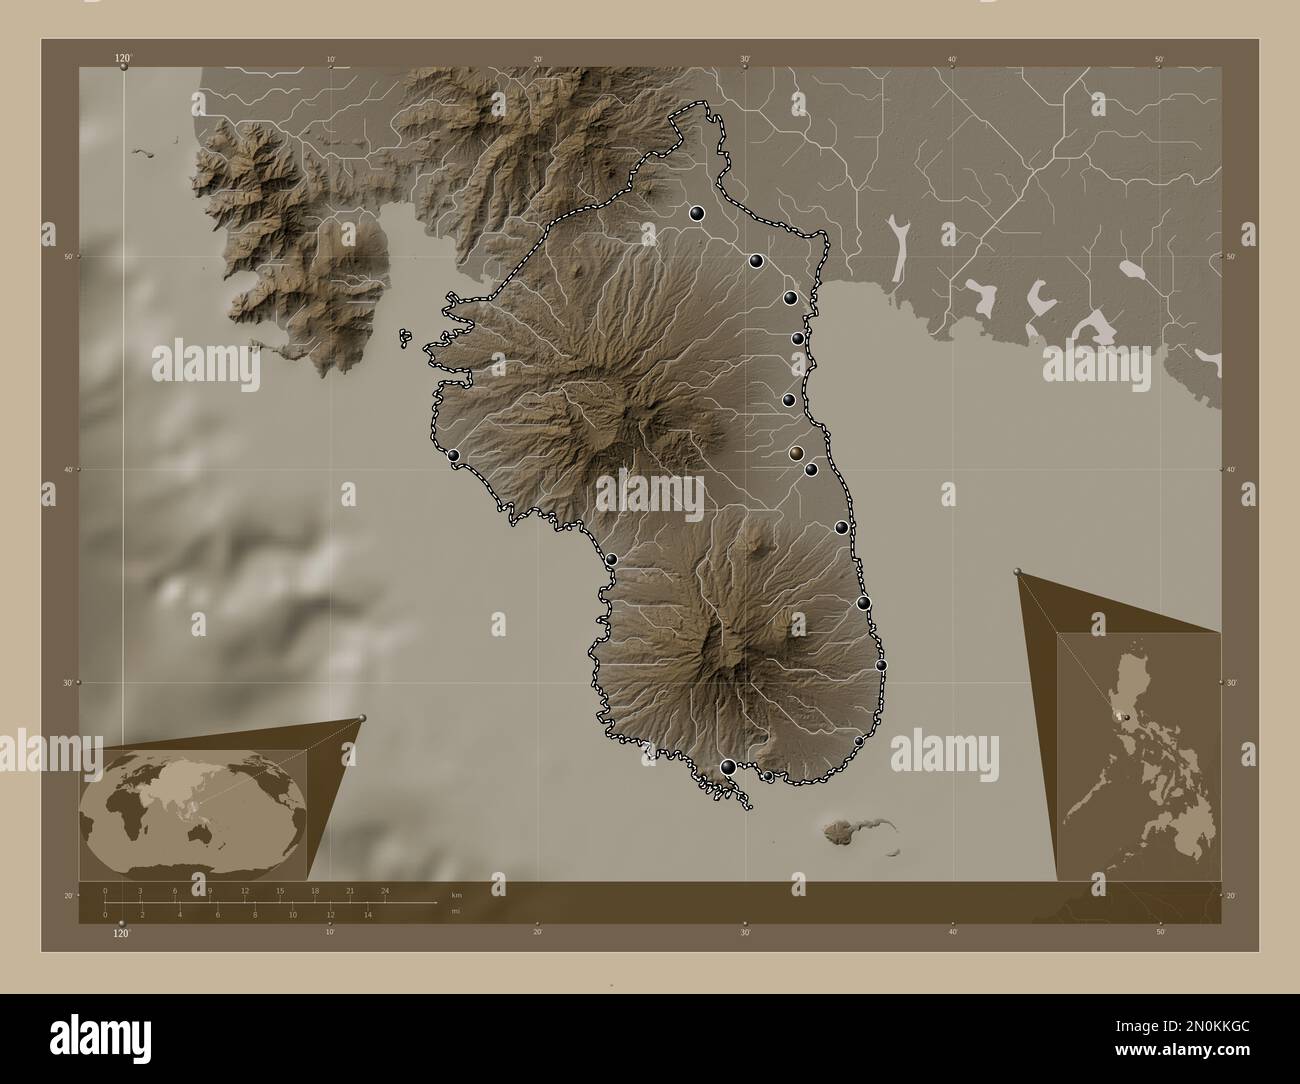 Bataan, province of Philippines. Elevation map colored in sepia tones with lakes and rivers. Locations of major cities of the region. Corner auxiliary Stock Photo